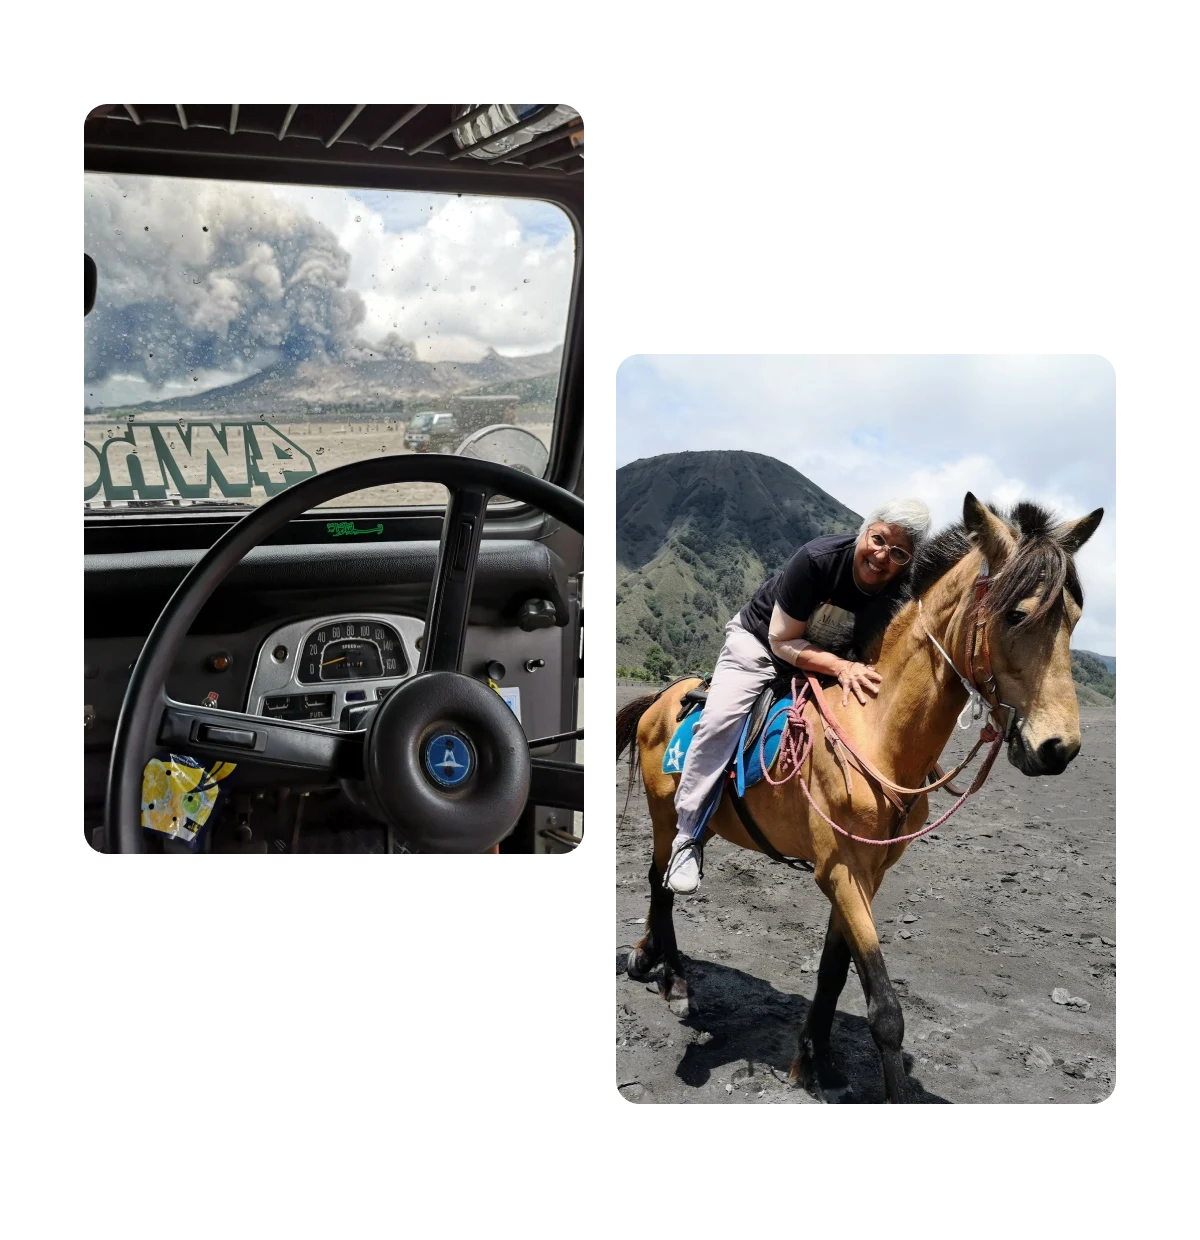 Two pins, interior of 4wd vehicle, and person riding horse